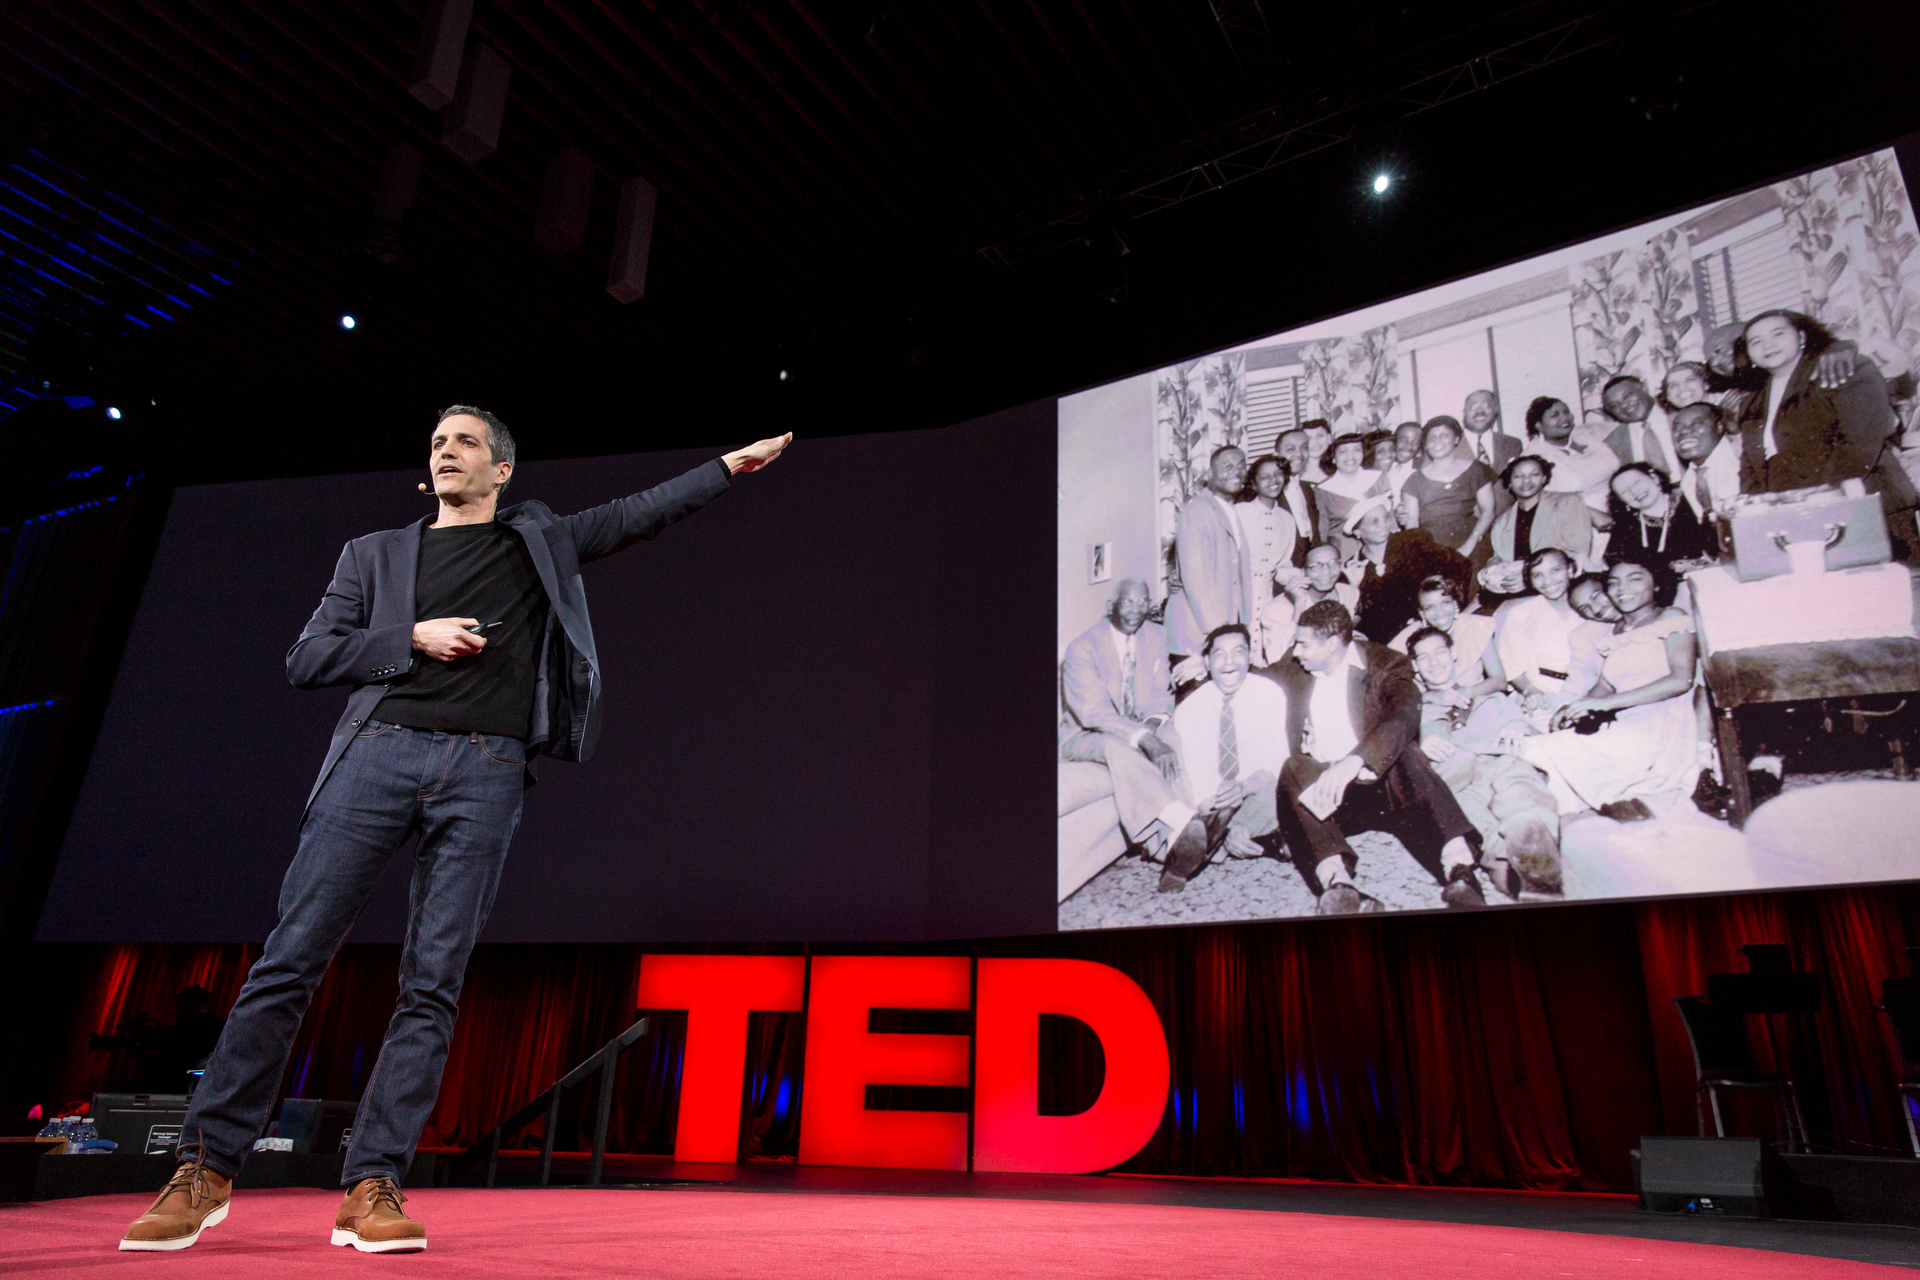 Sam Green speaks at TED2015 - Truth and Dare, Session 8. Photo: Bret Hartman/TED